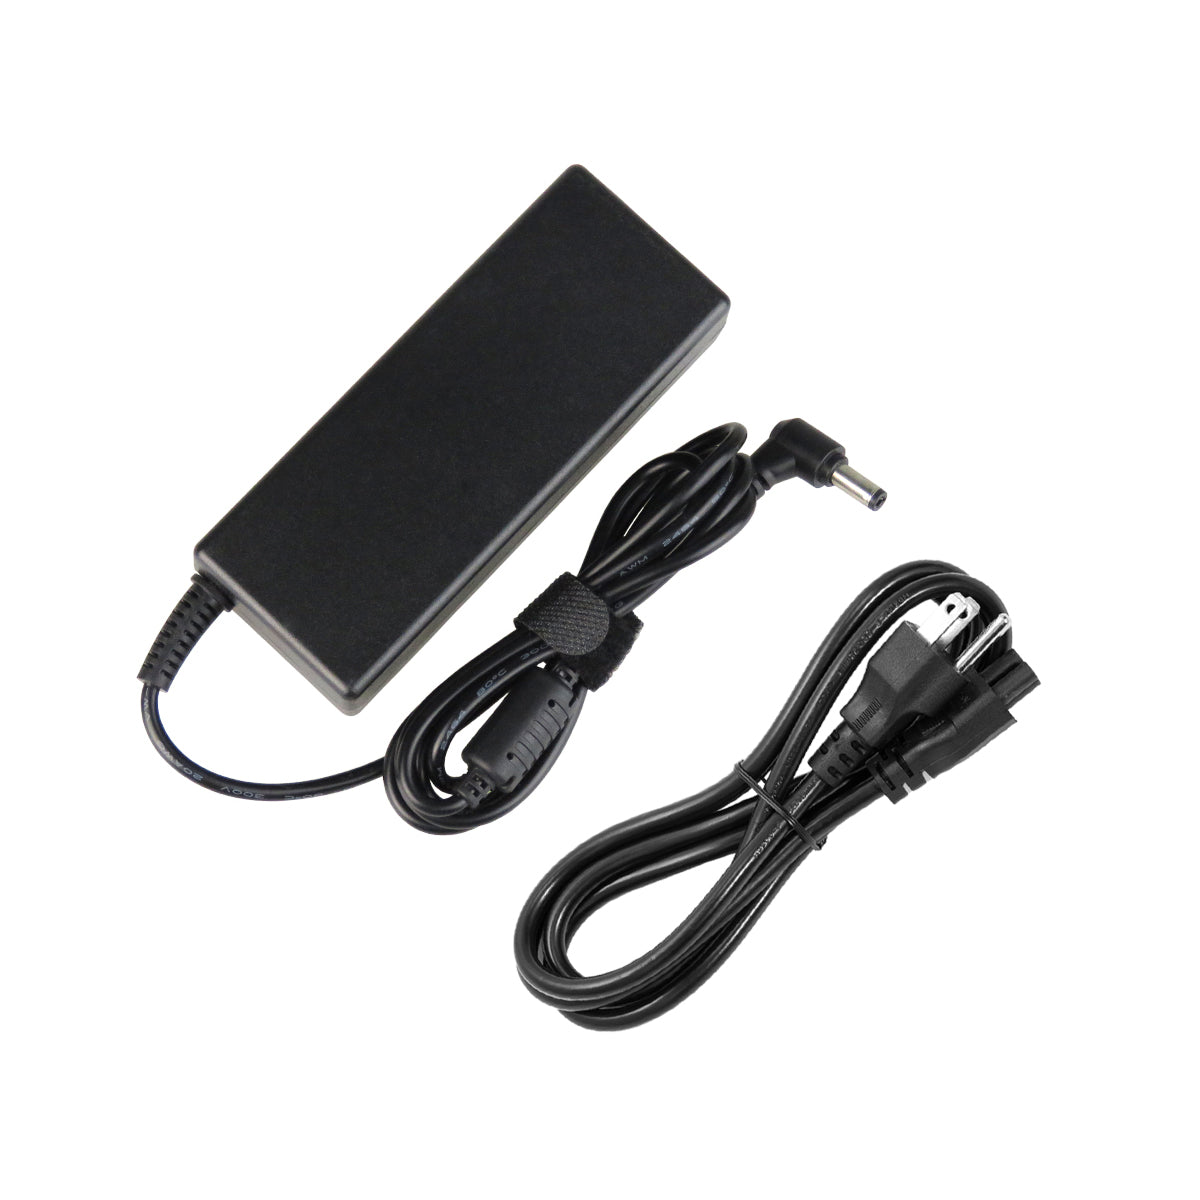 AC Adapter Charger for Toshiba Satellite c55-a5220 Notebook.